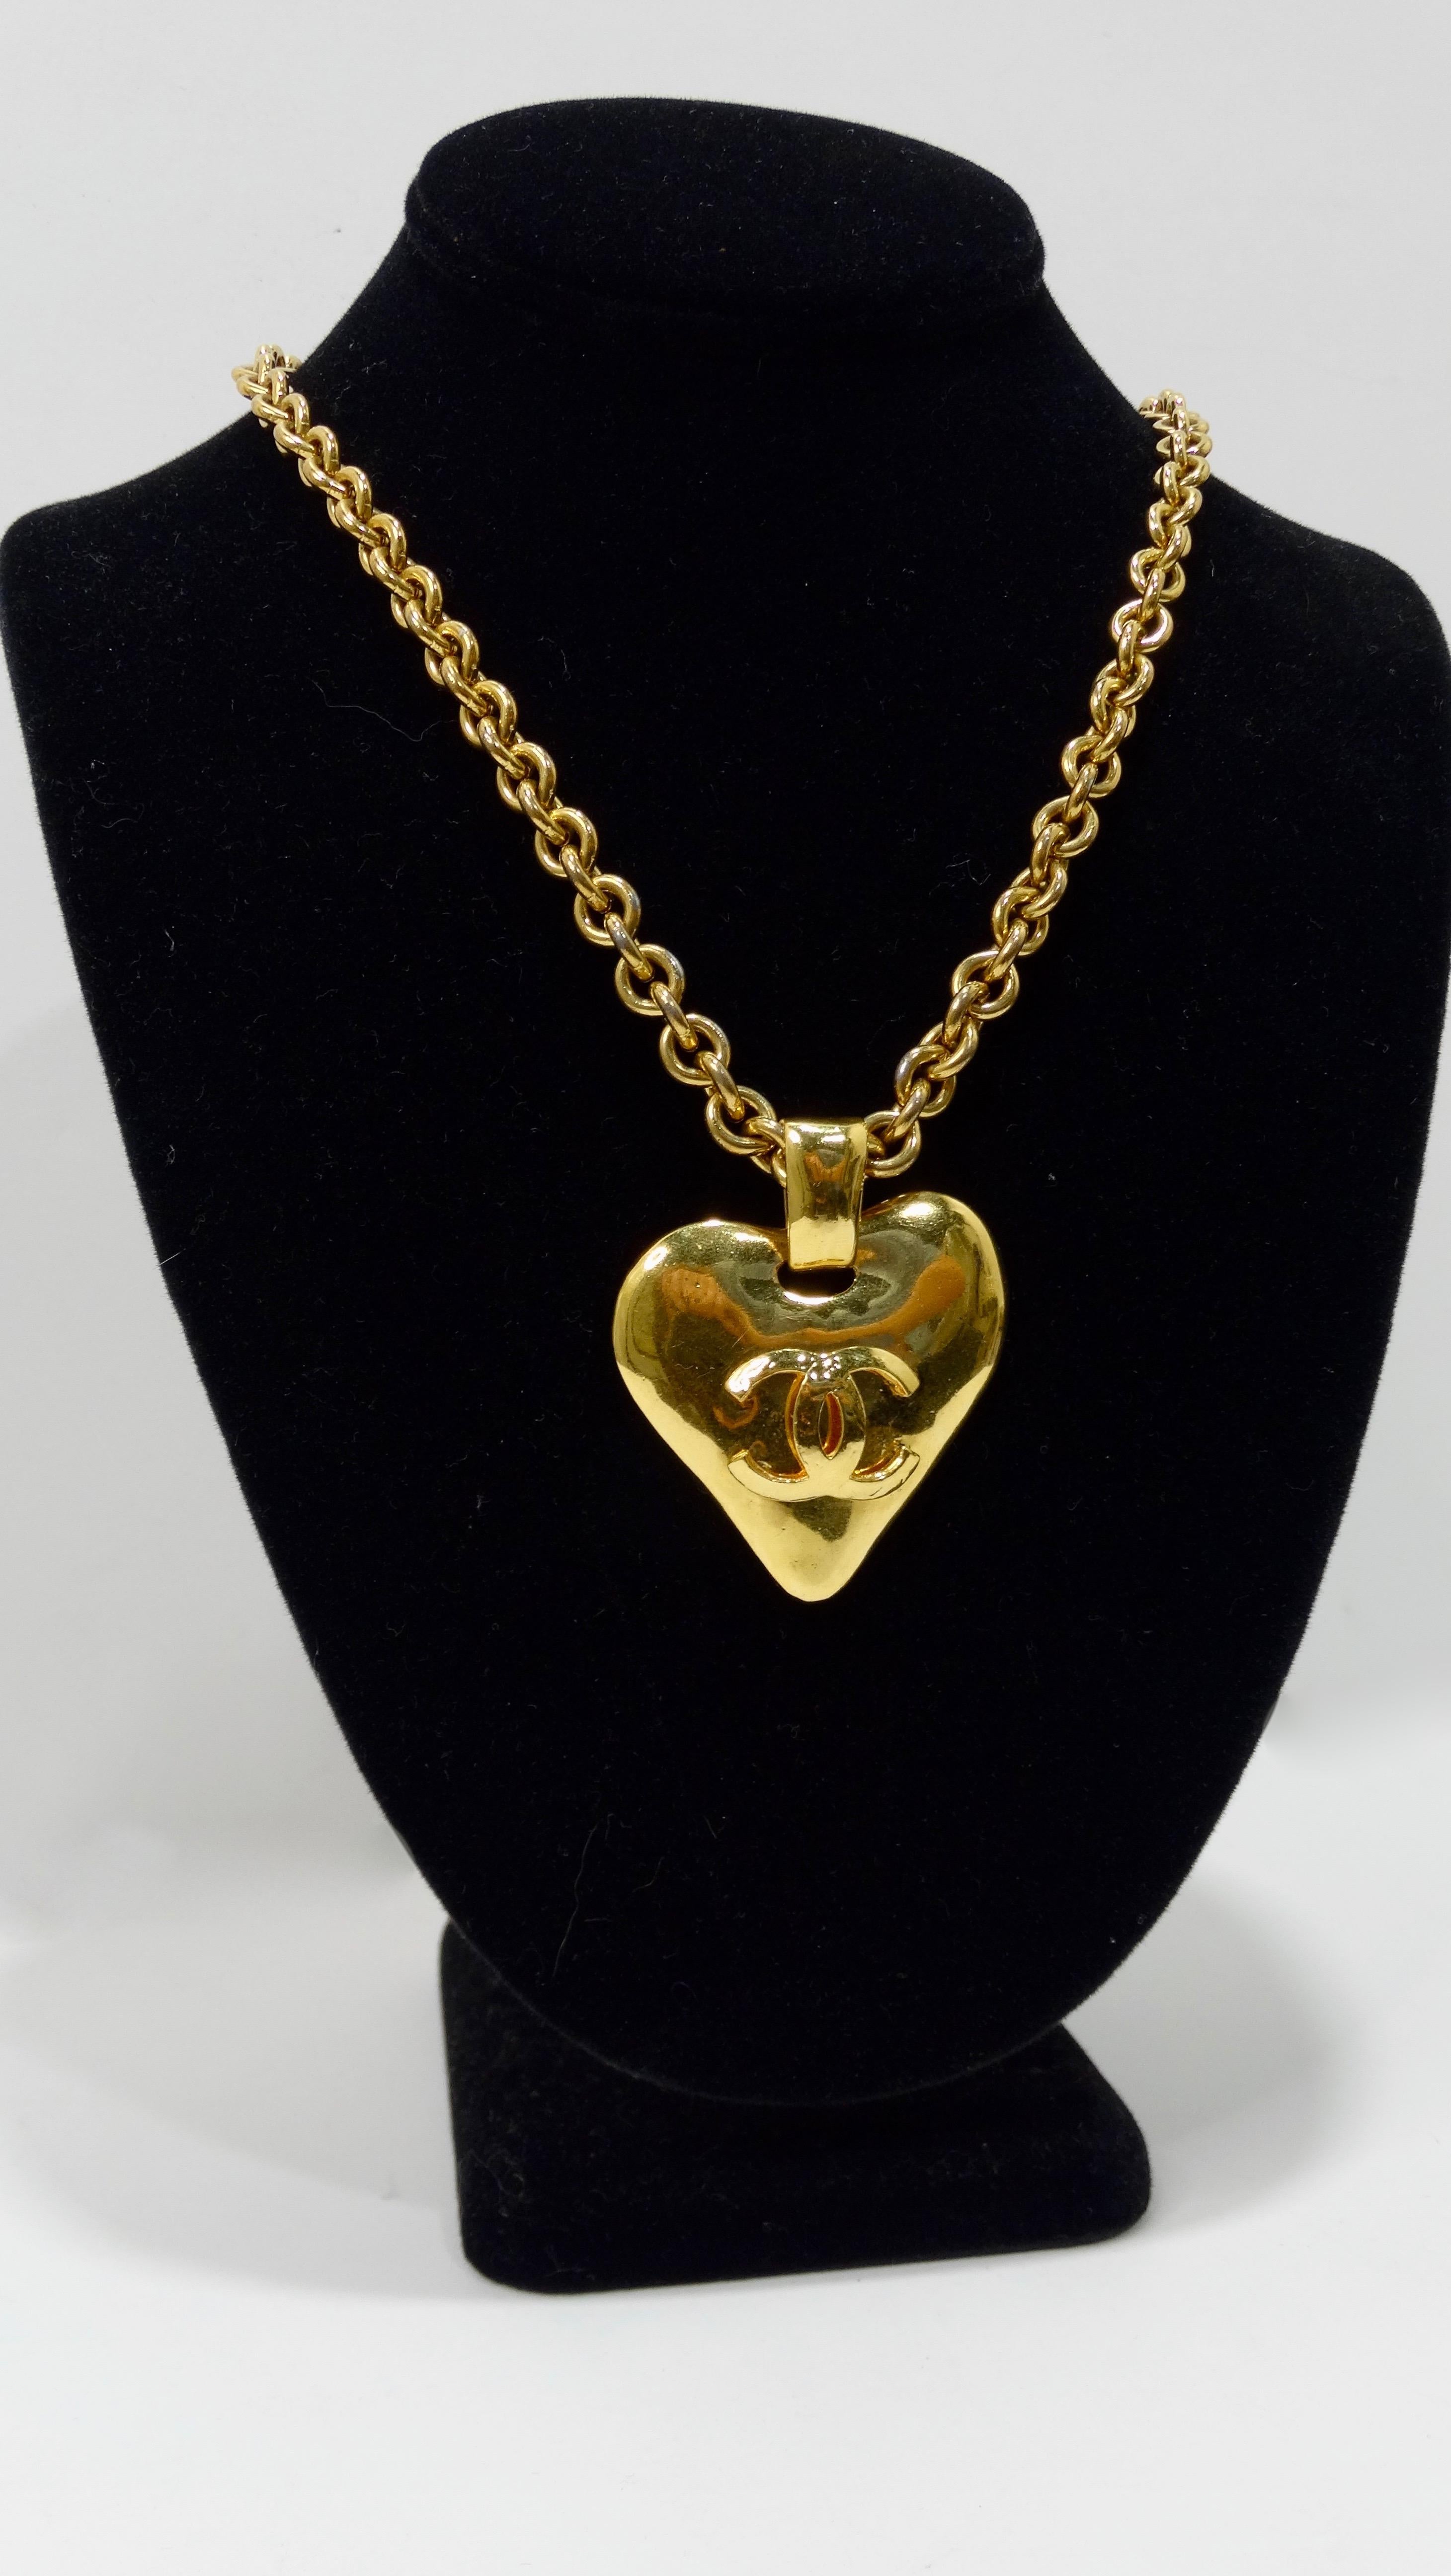 Show your love for Chanel with this amazing necklace! Circa 1993 from their Spring collection, this gold tone chain link necklace features a large heart pendant complete with the signature CC logo. Stamped 93P Made in France. Classic and timeless,